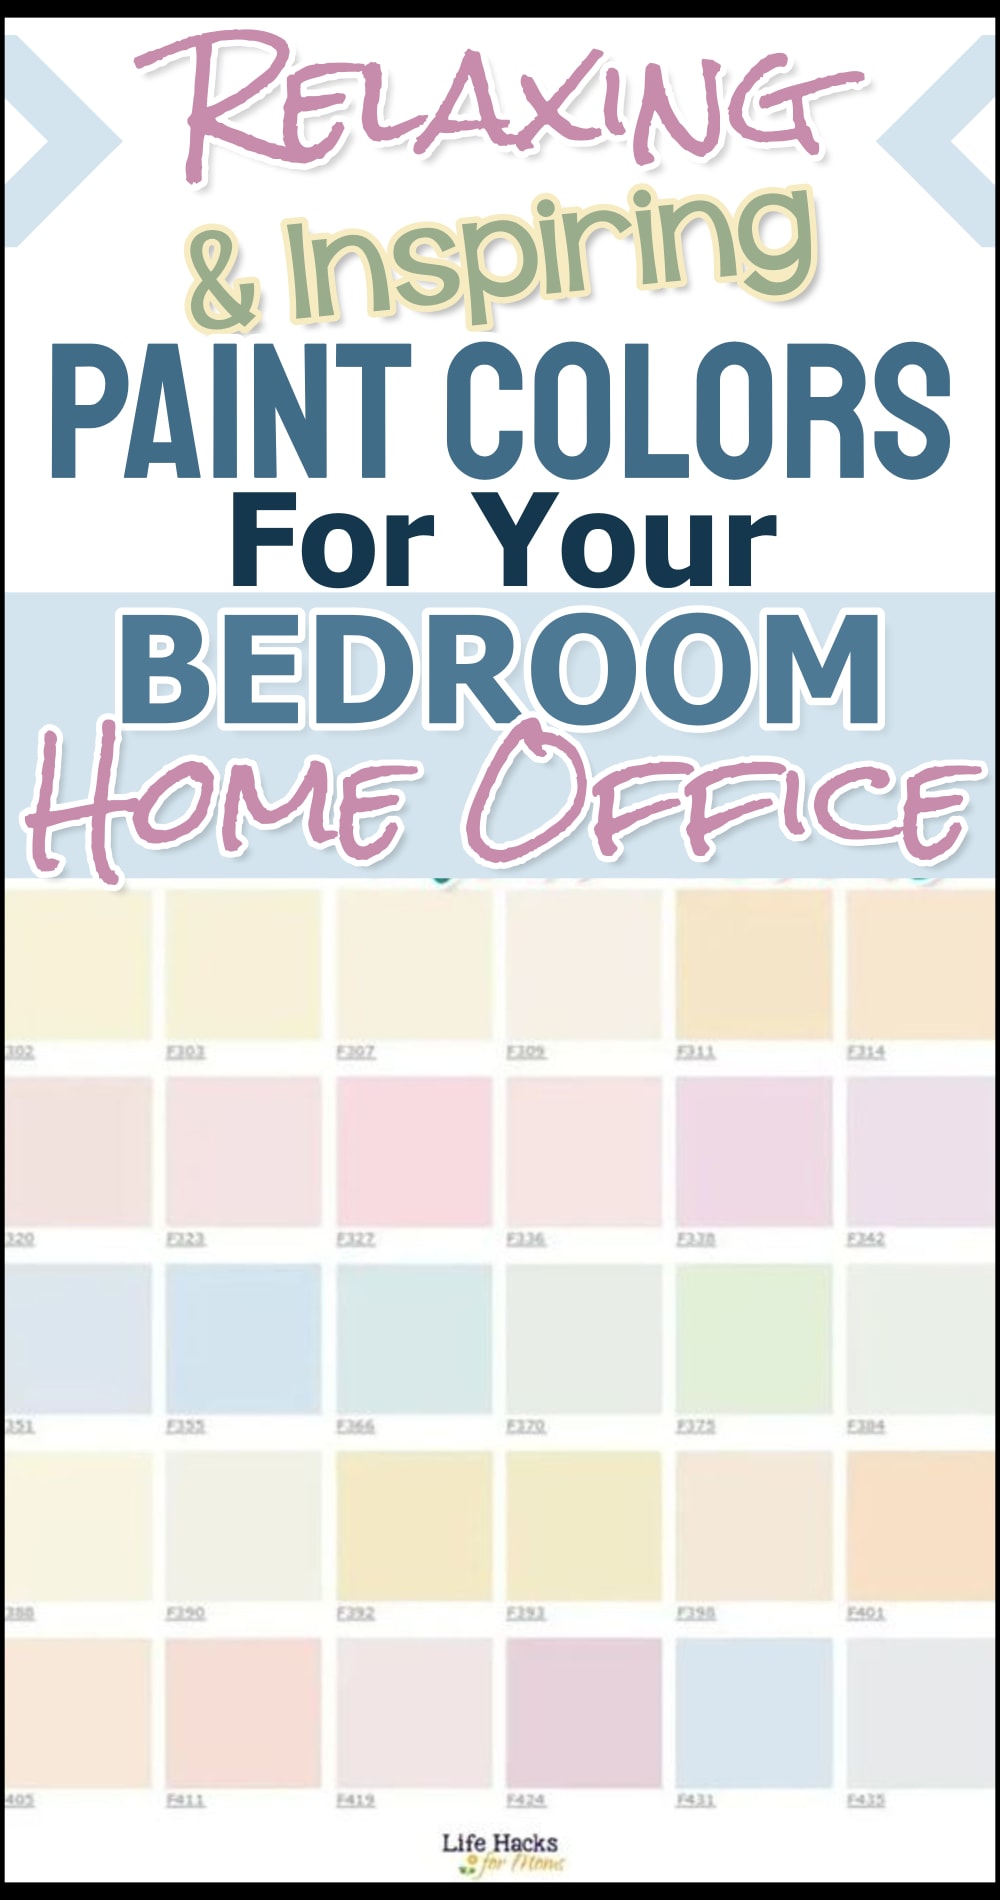 guest room combo paint color ideas - relaxing and inspiring paint colors for your bedroom home office or guest room craft room